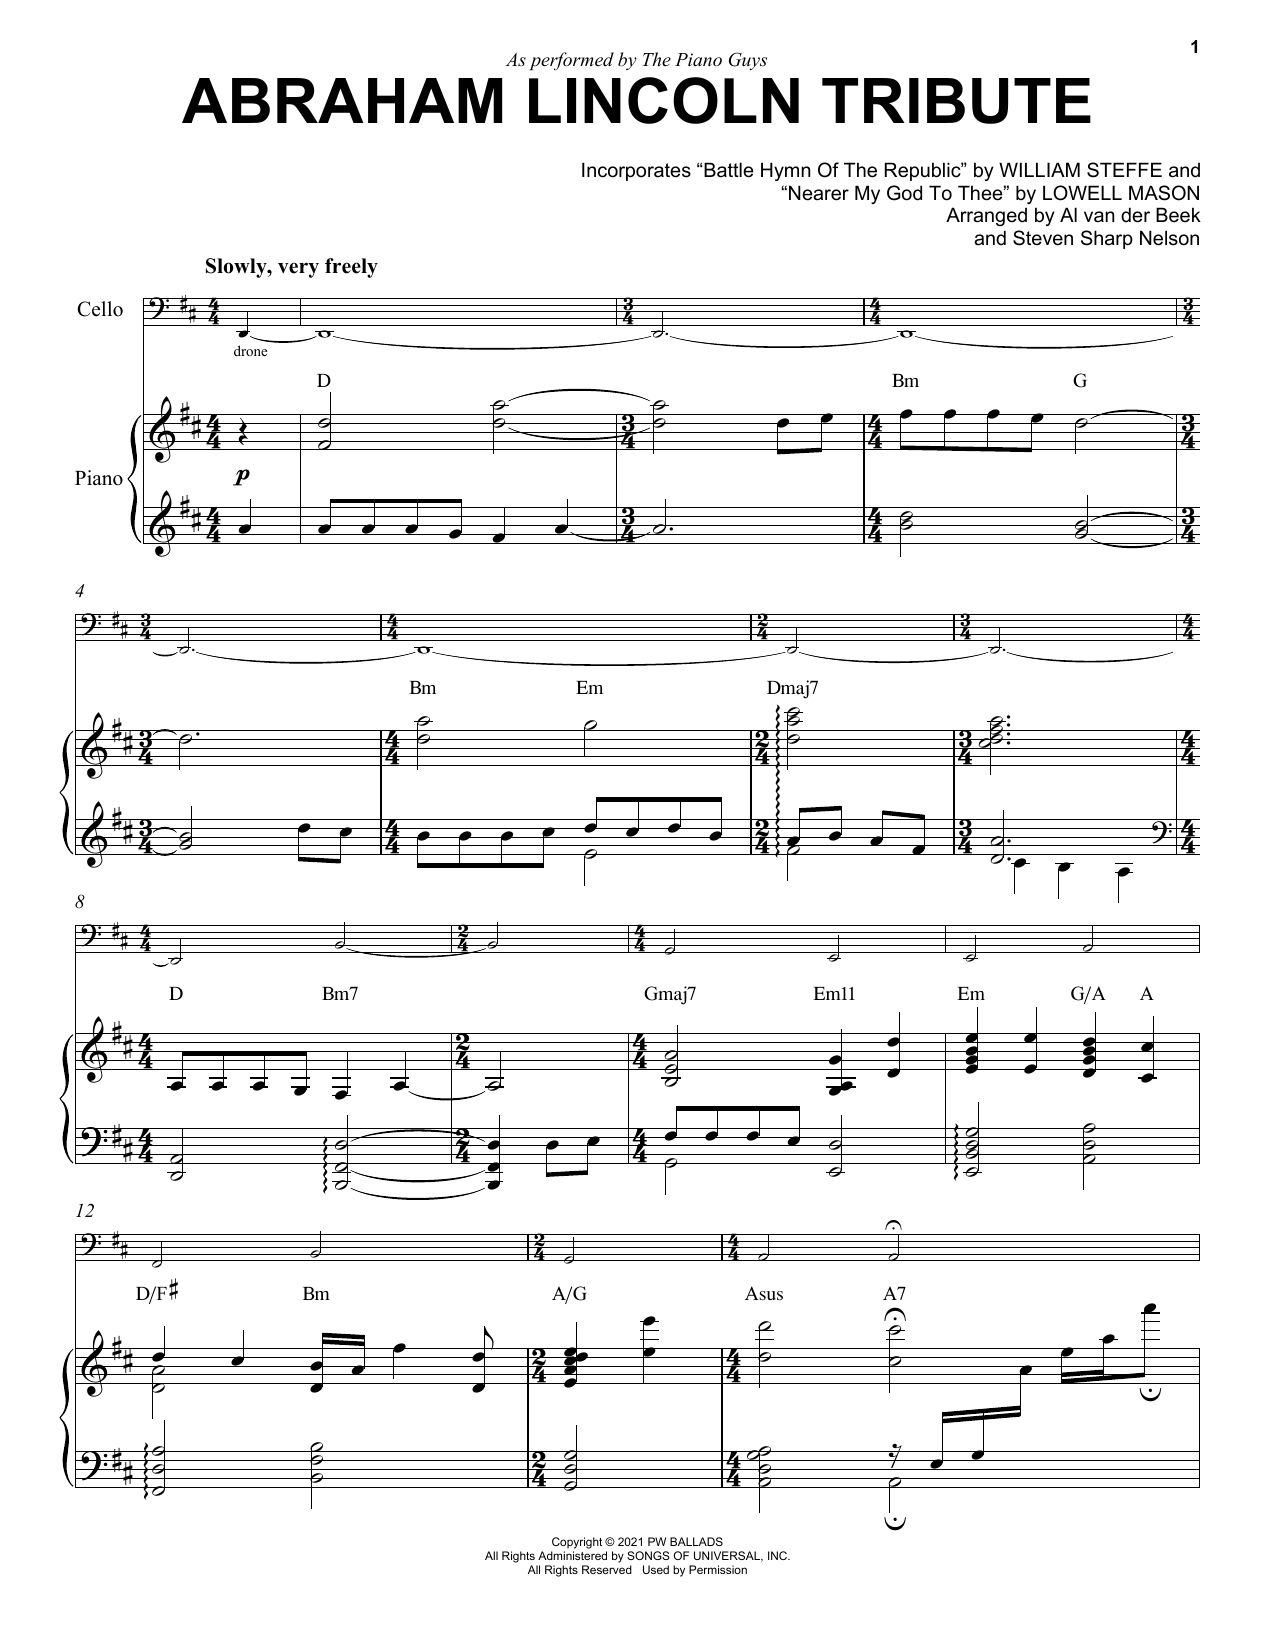 Download The Piano Guys Abraham Lincoln Tribute Sheet Music